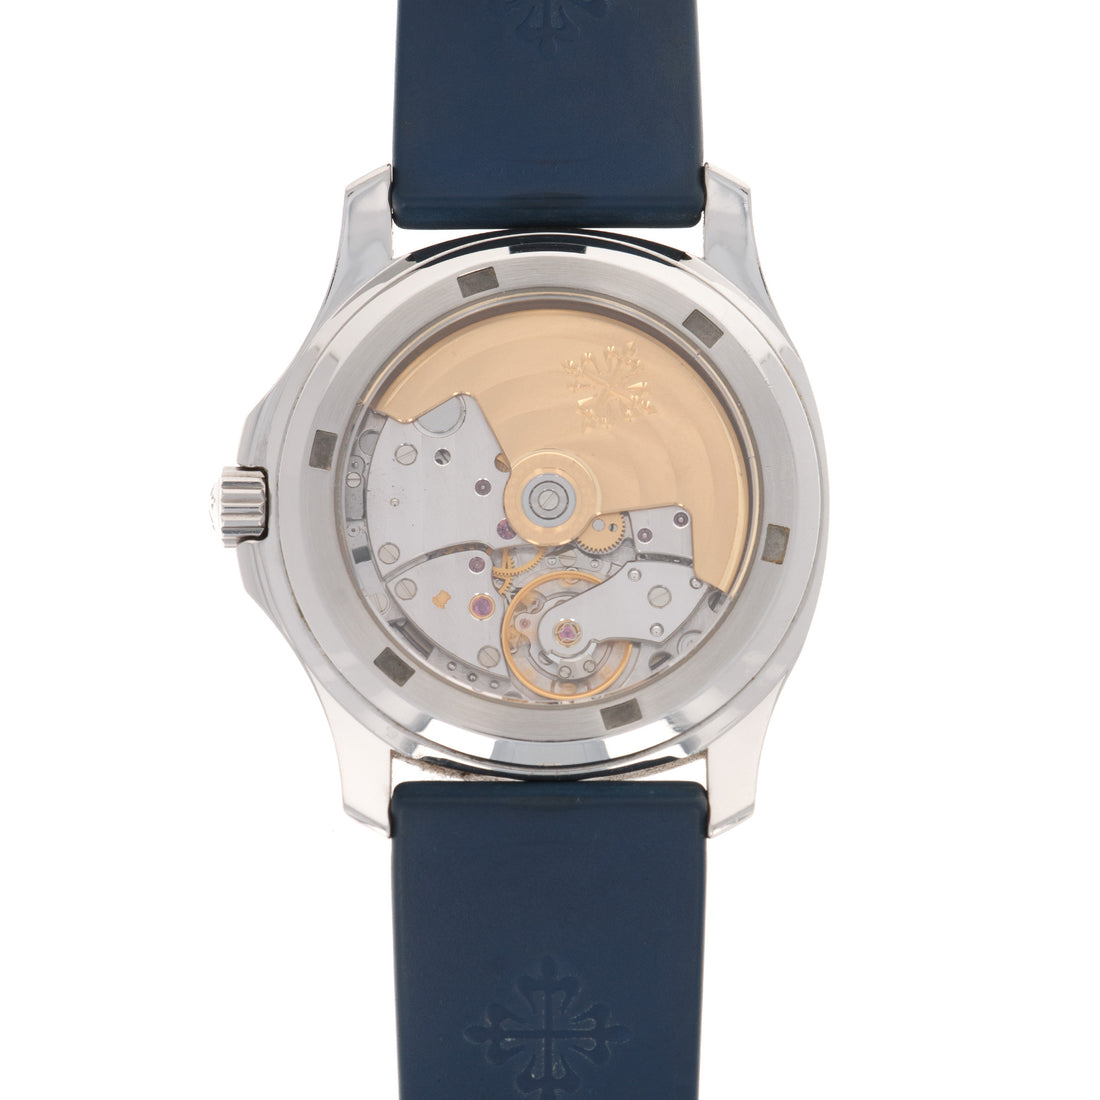 Patek Philippe Aquanaut Blue Dial Watch Ref. 5066, Made for the Japanese Market